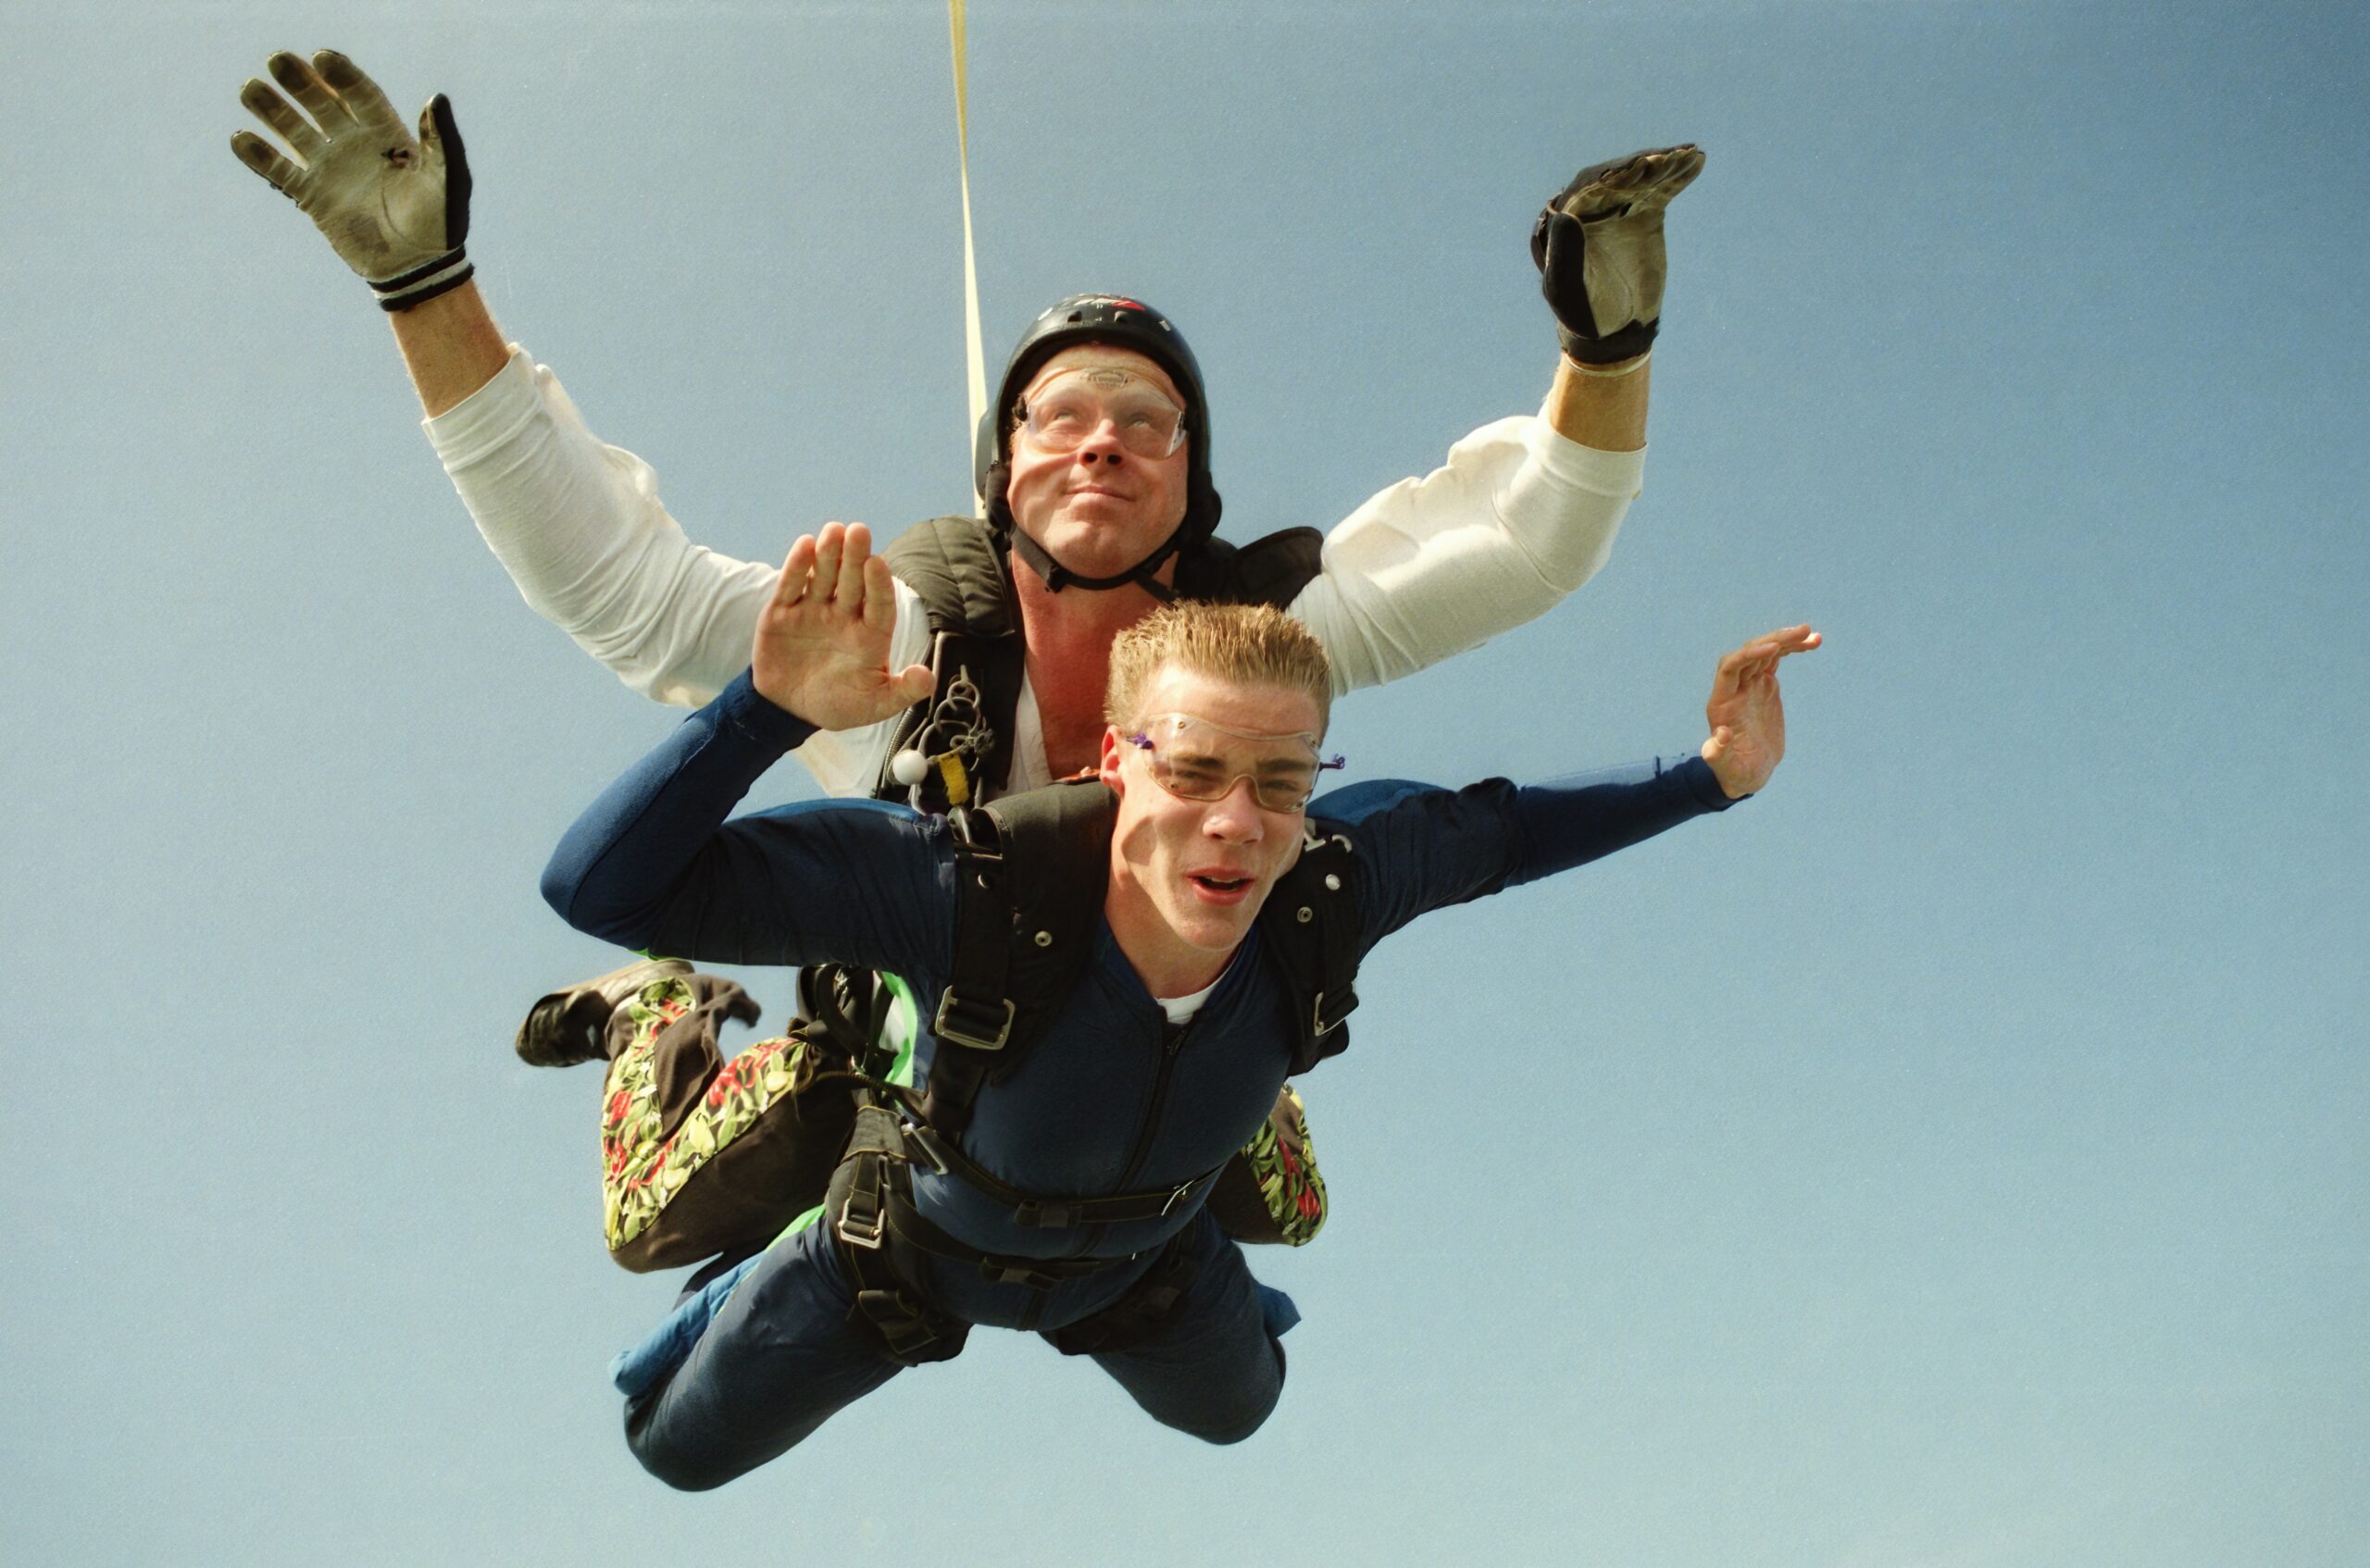 two men skydiving with gear and goggles and smiling | indoor skydiving Lone Tree